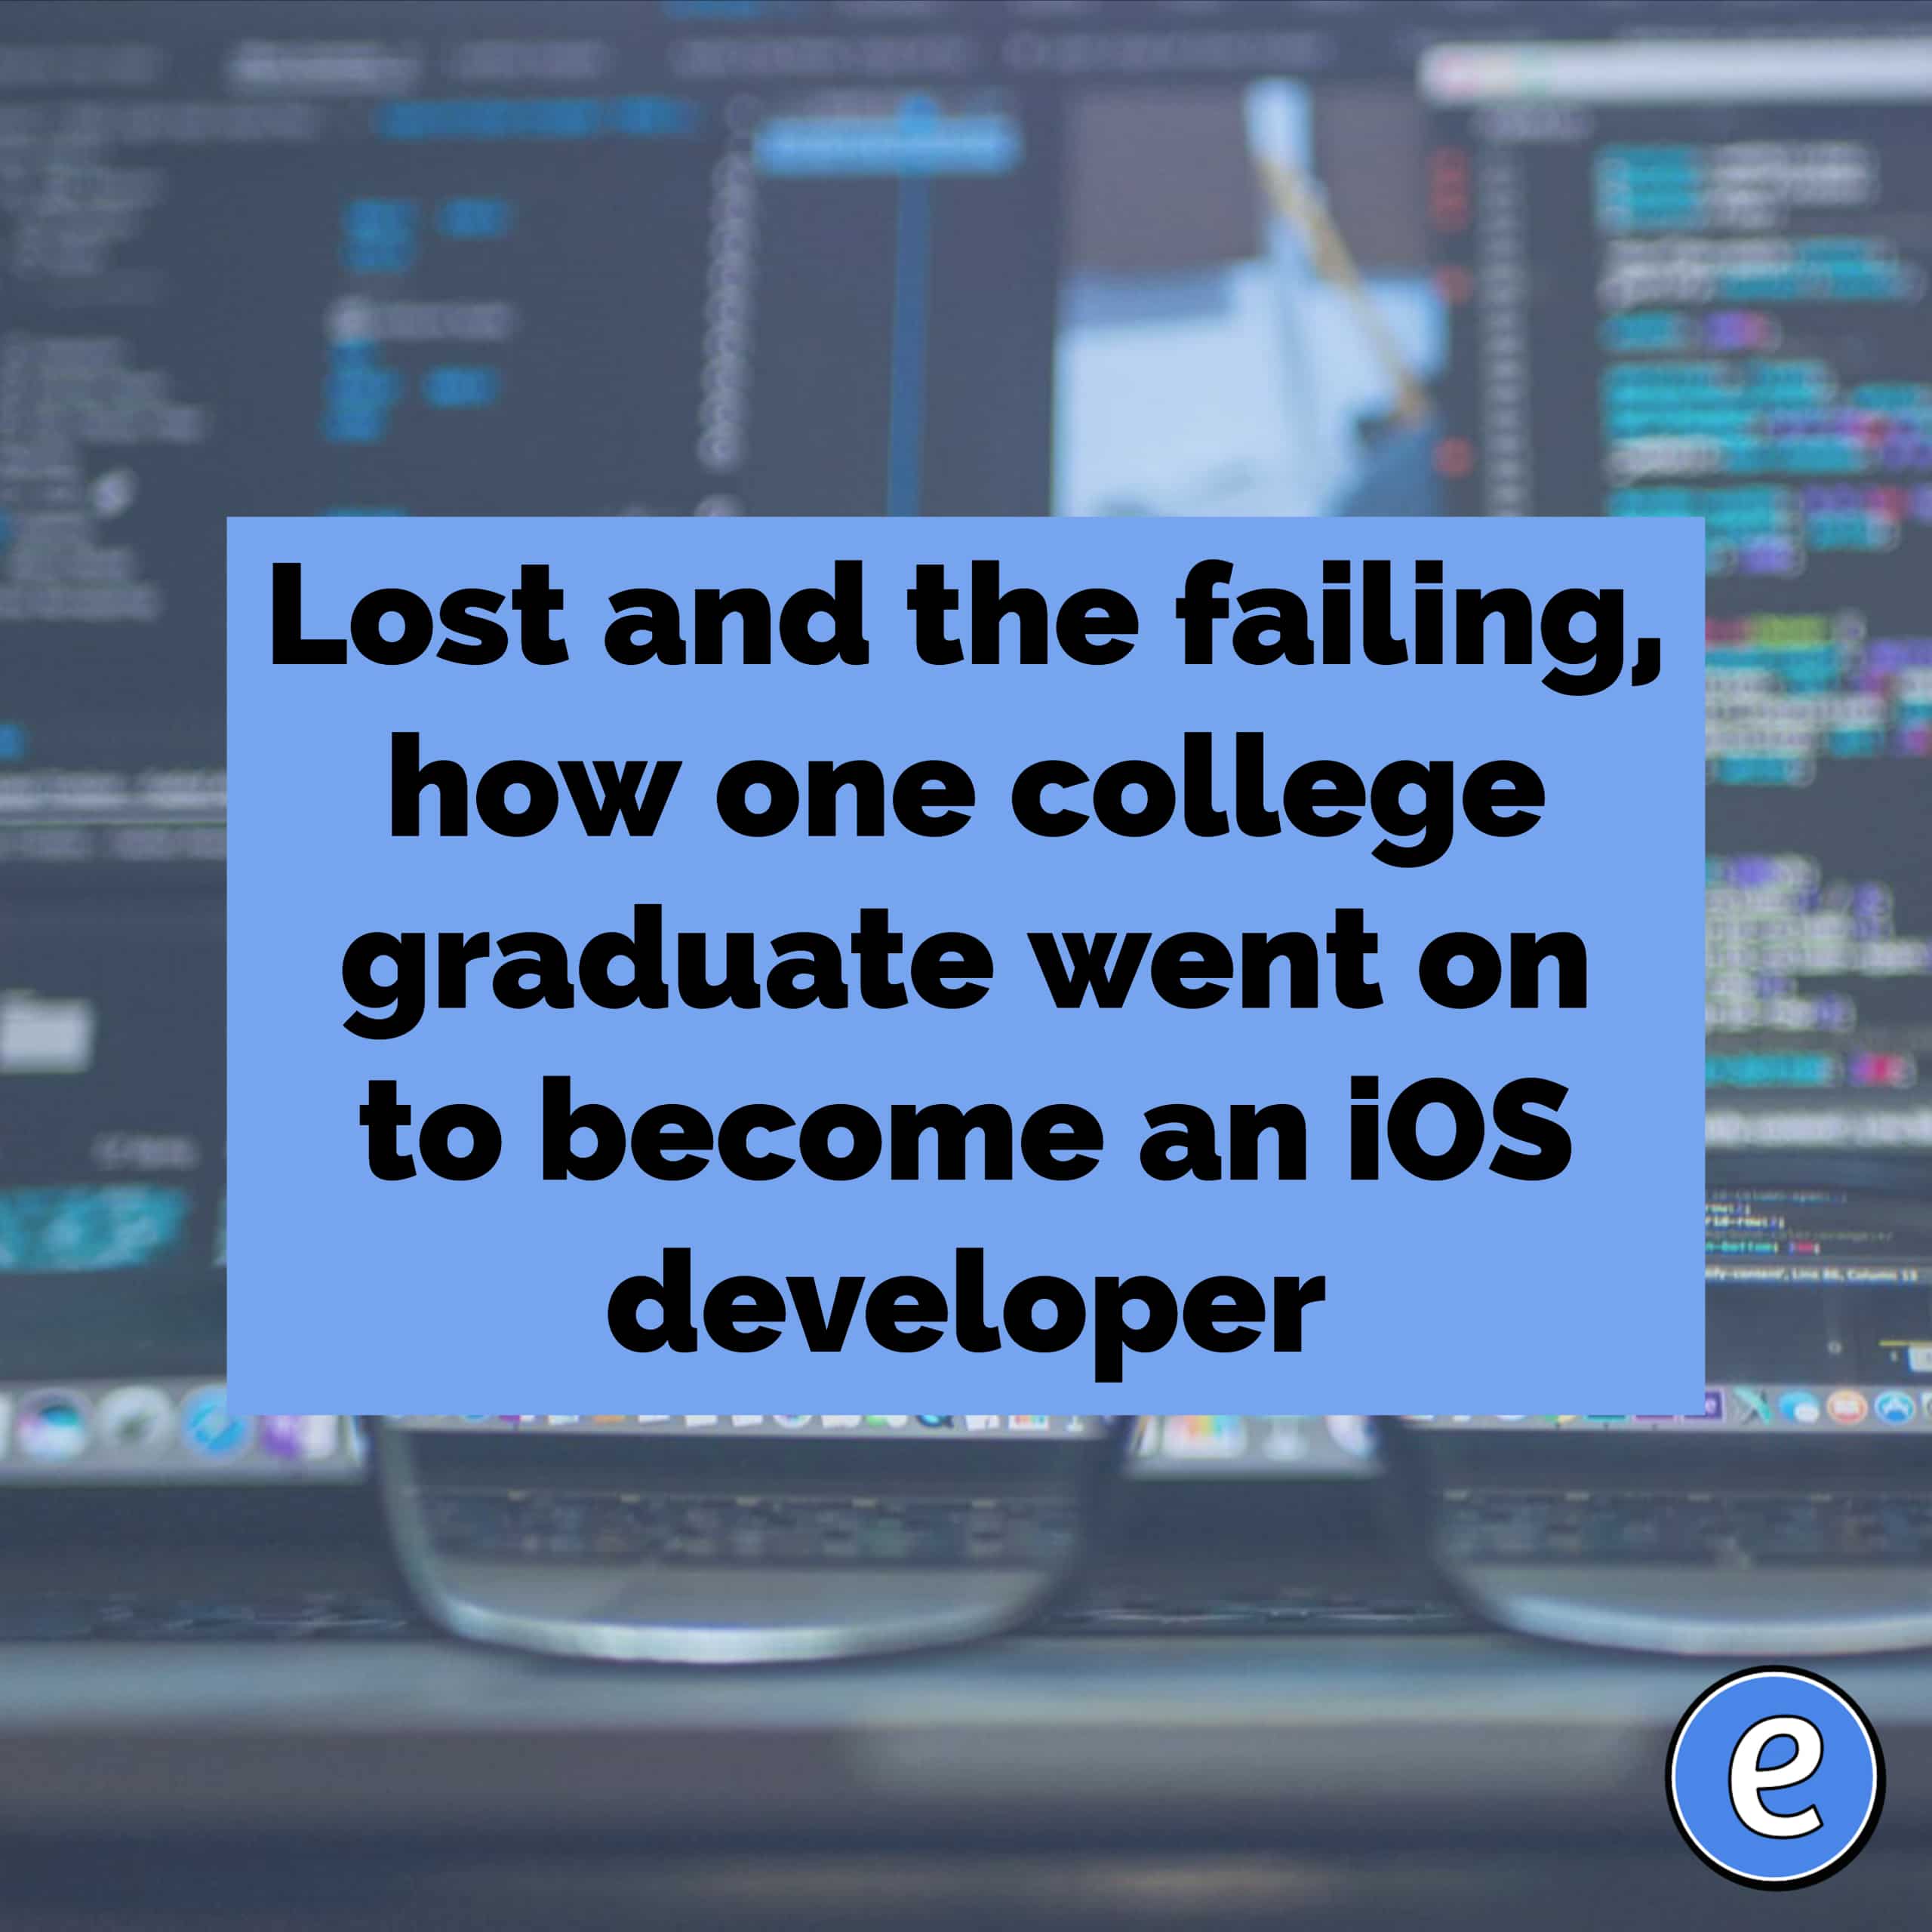 Lost and the failing, how one college graduate went on to become an iOS developer